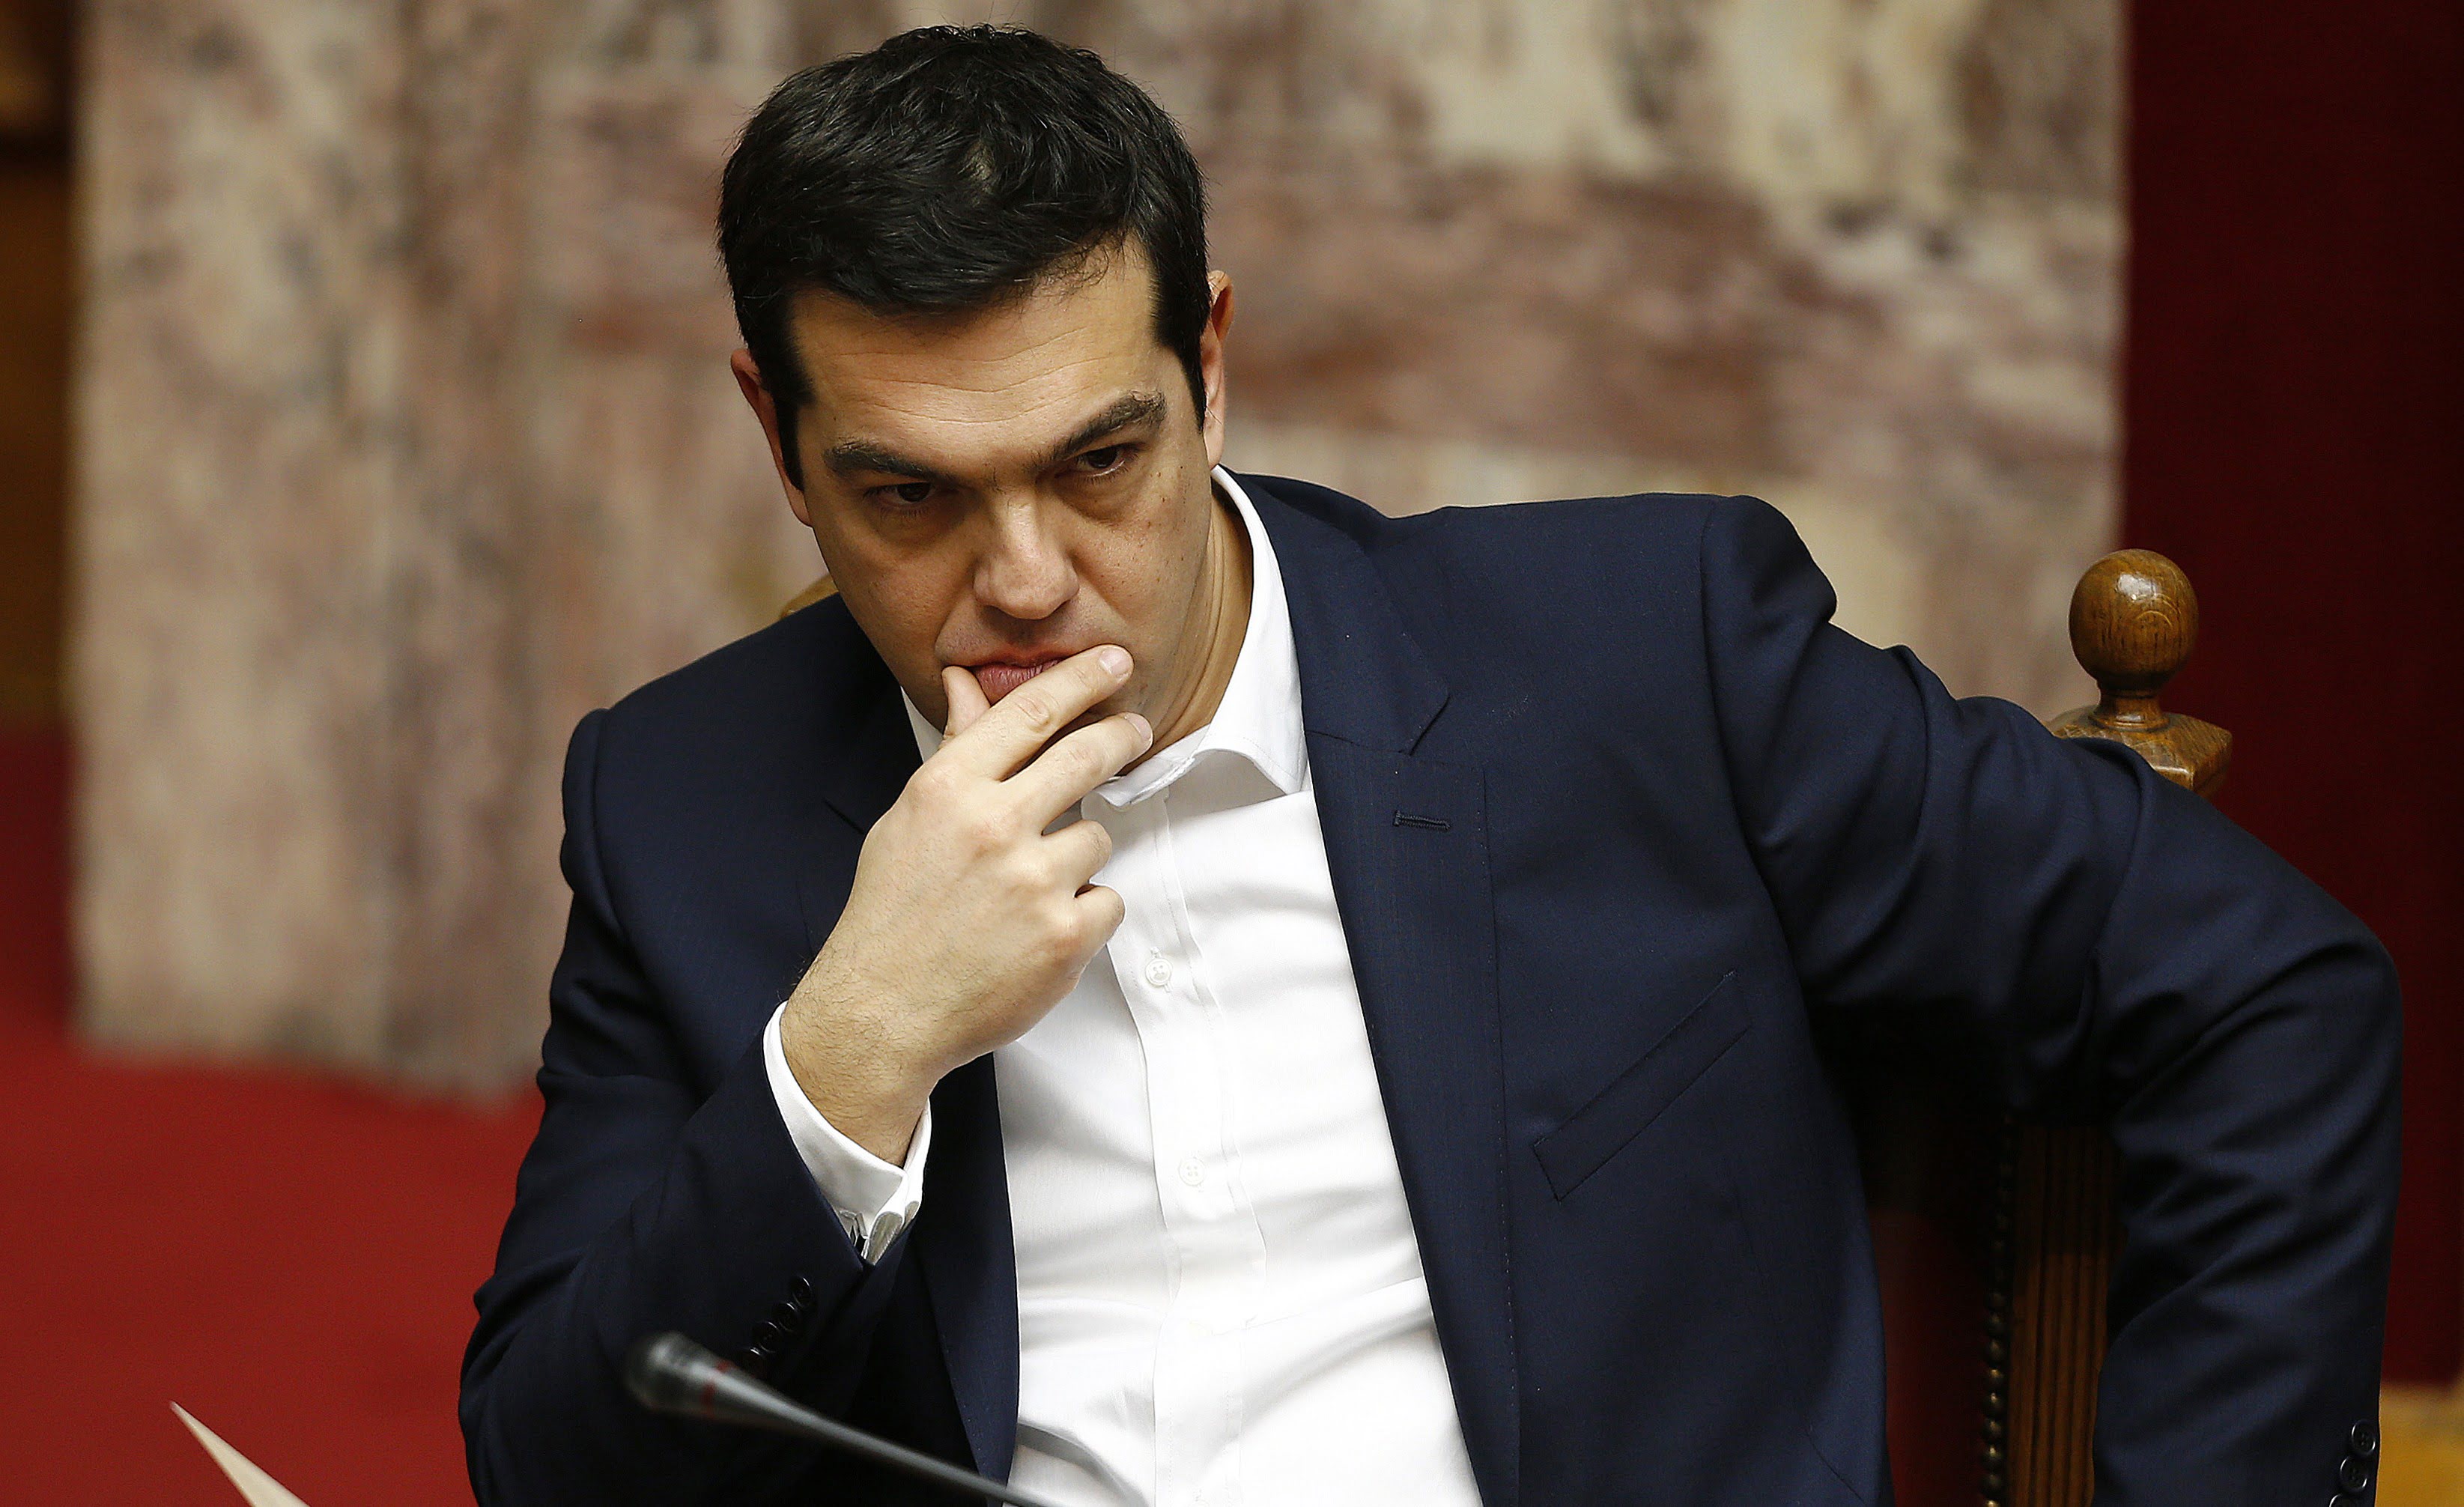 Greek Prime minister Alexis Tsipras reacts before a swearing in ceremony for Greece's new lawmakers in the Greek parliament in Athens February 5, 2015. REUTERS/Yannis Behrakis (GREECE - Tags: POLITICS) - RTR4OCA9